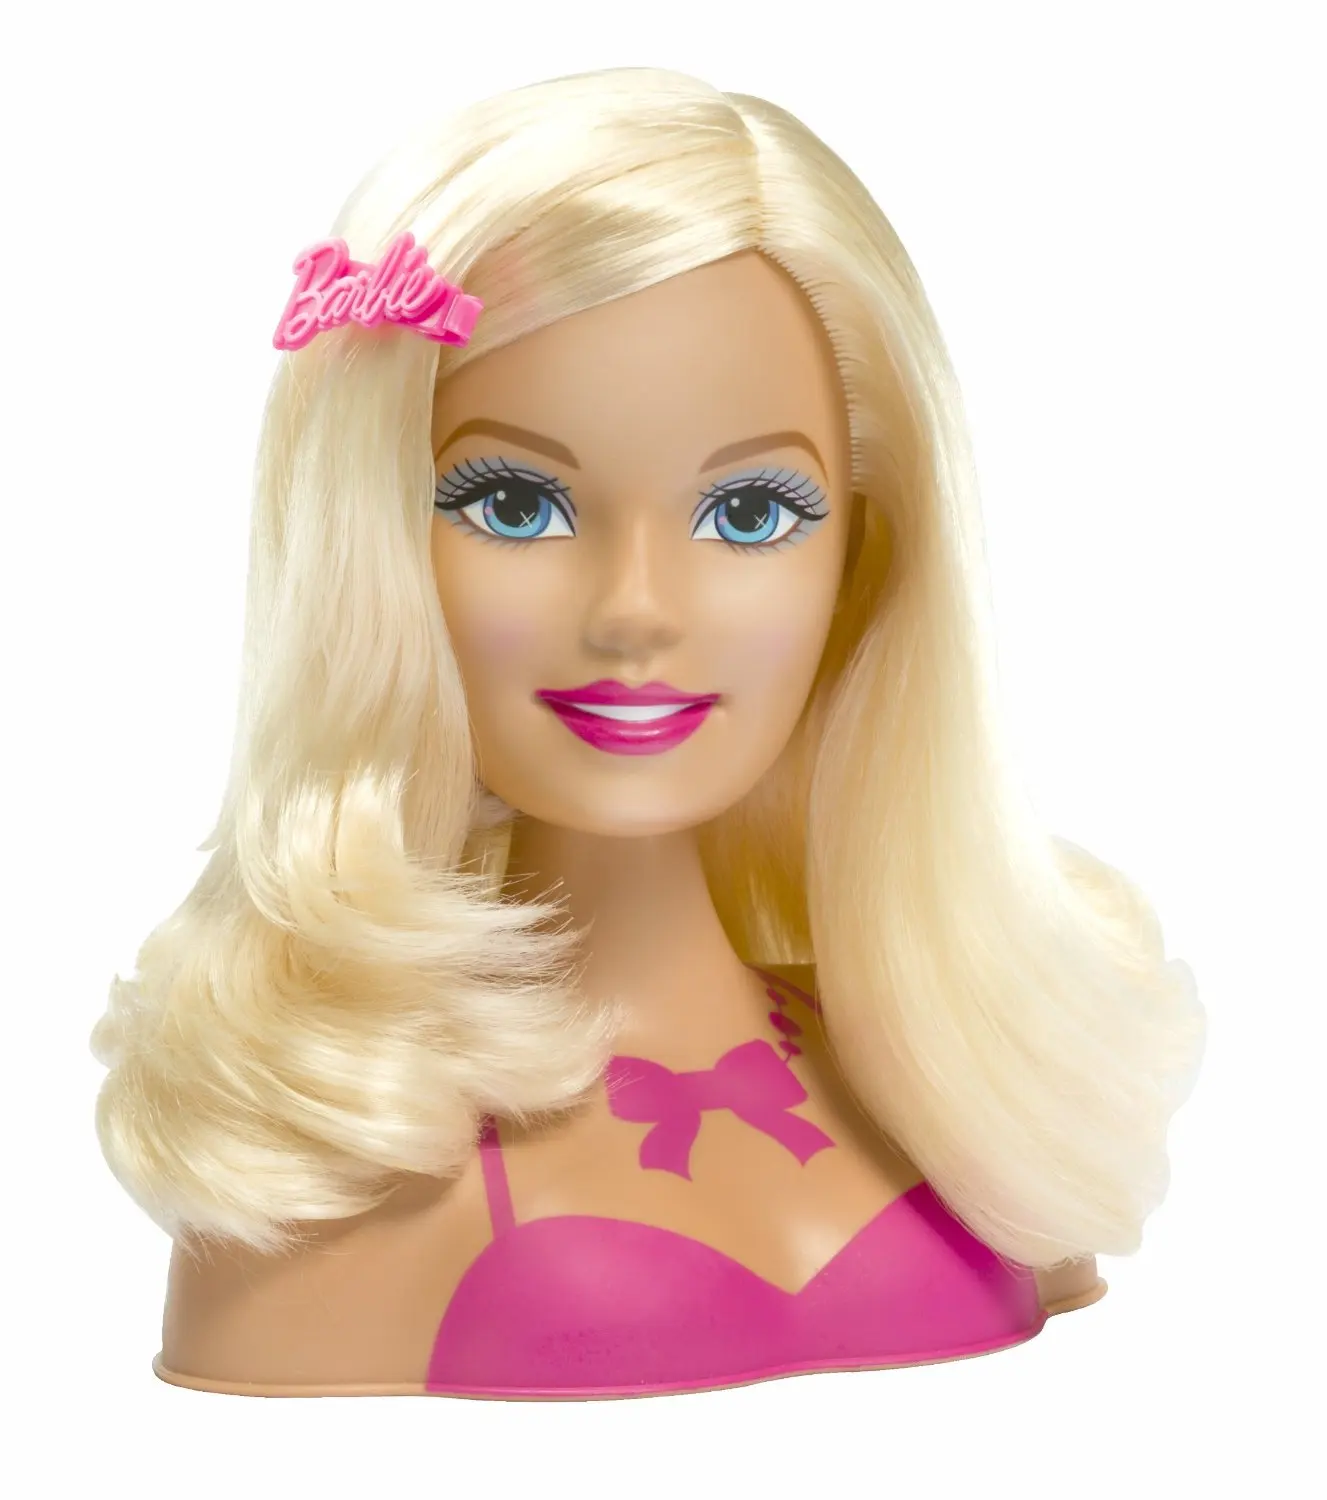 Buy Barbie Styling Head  in Cheap Price on Alibaba com